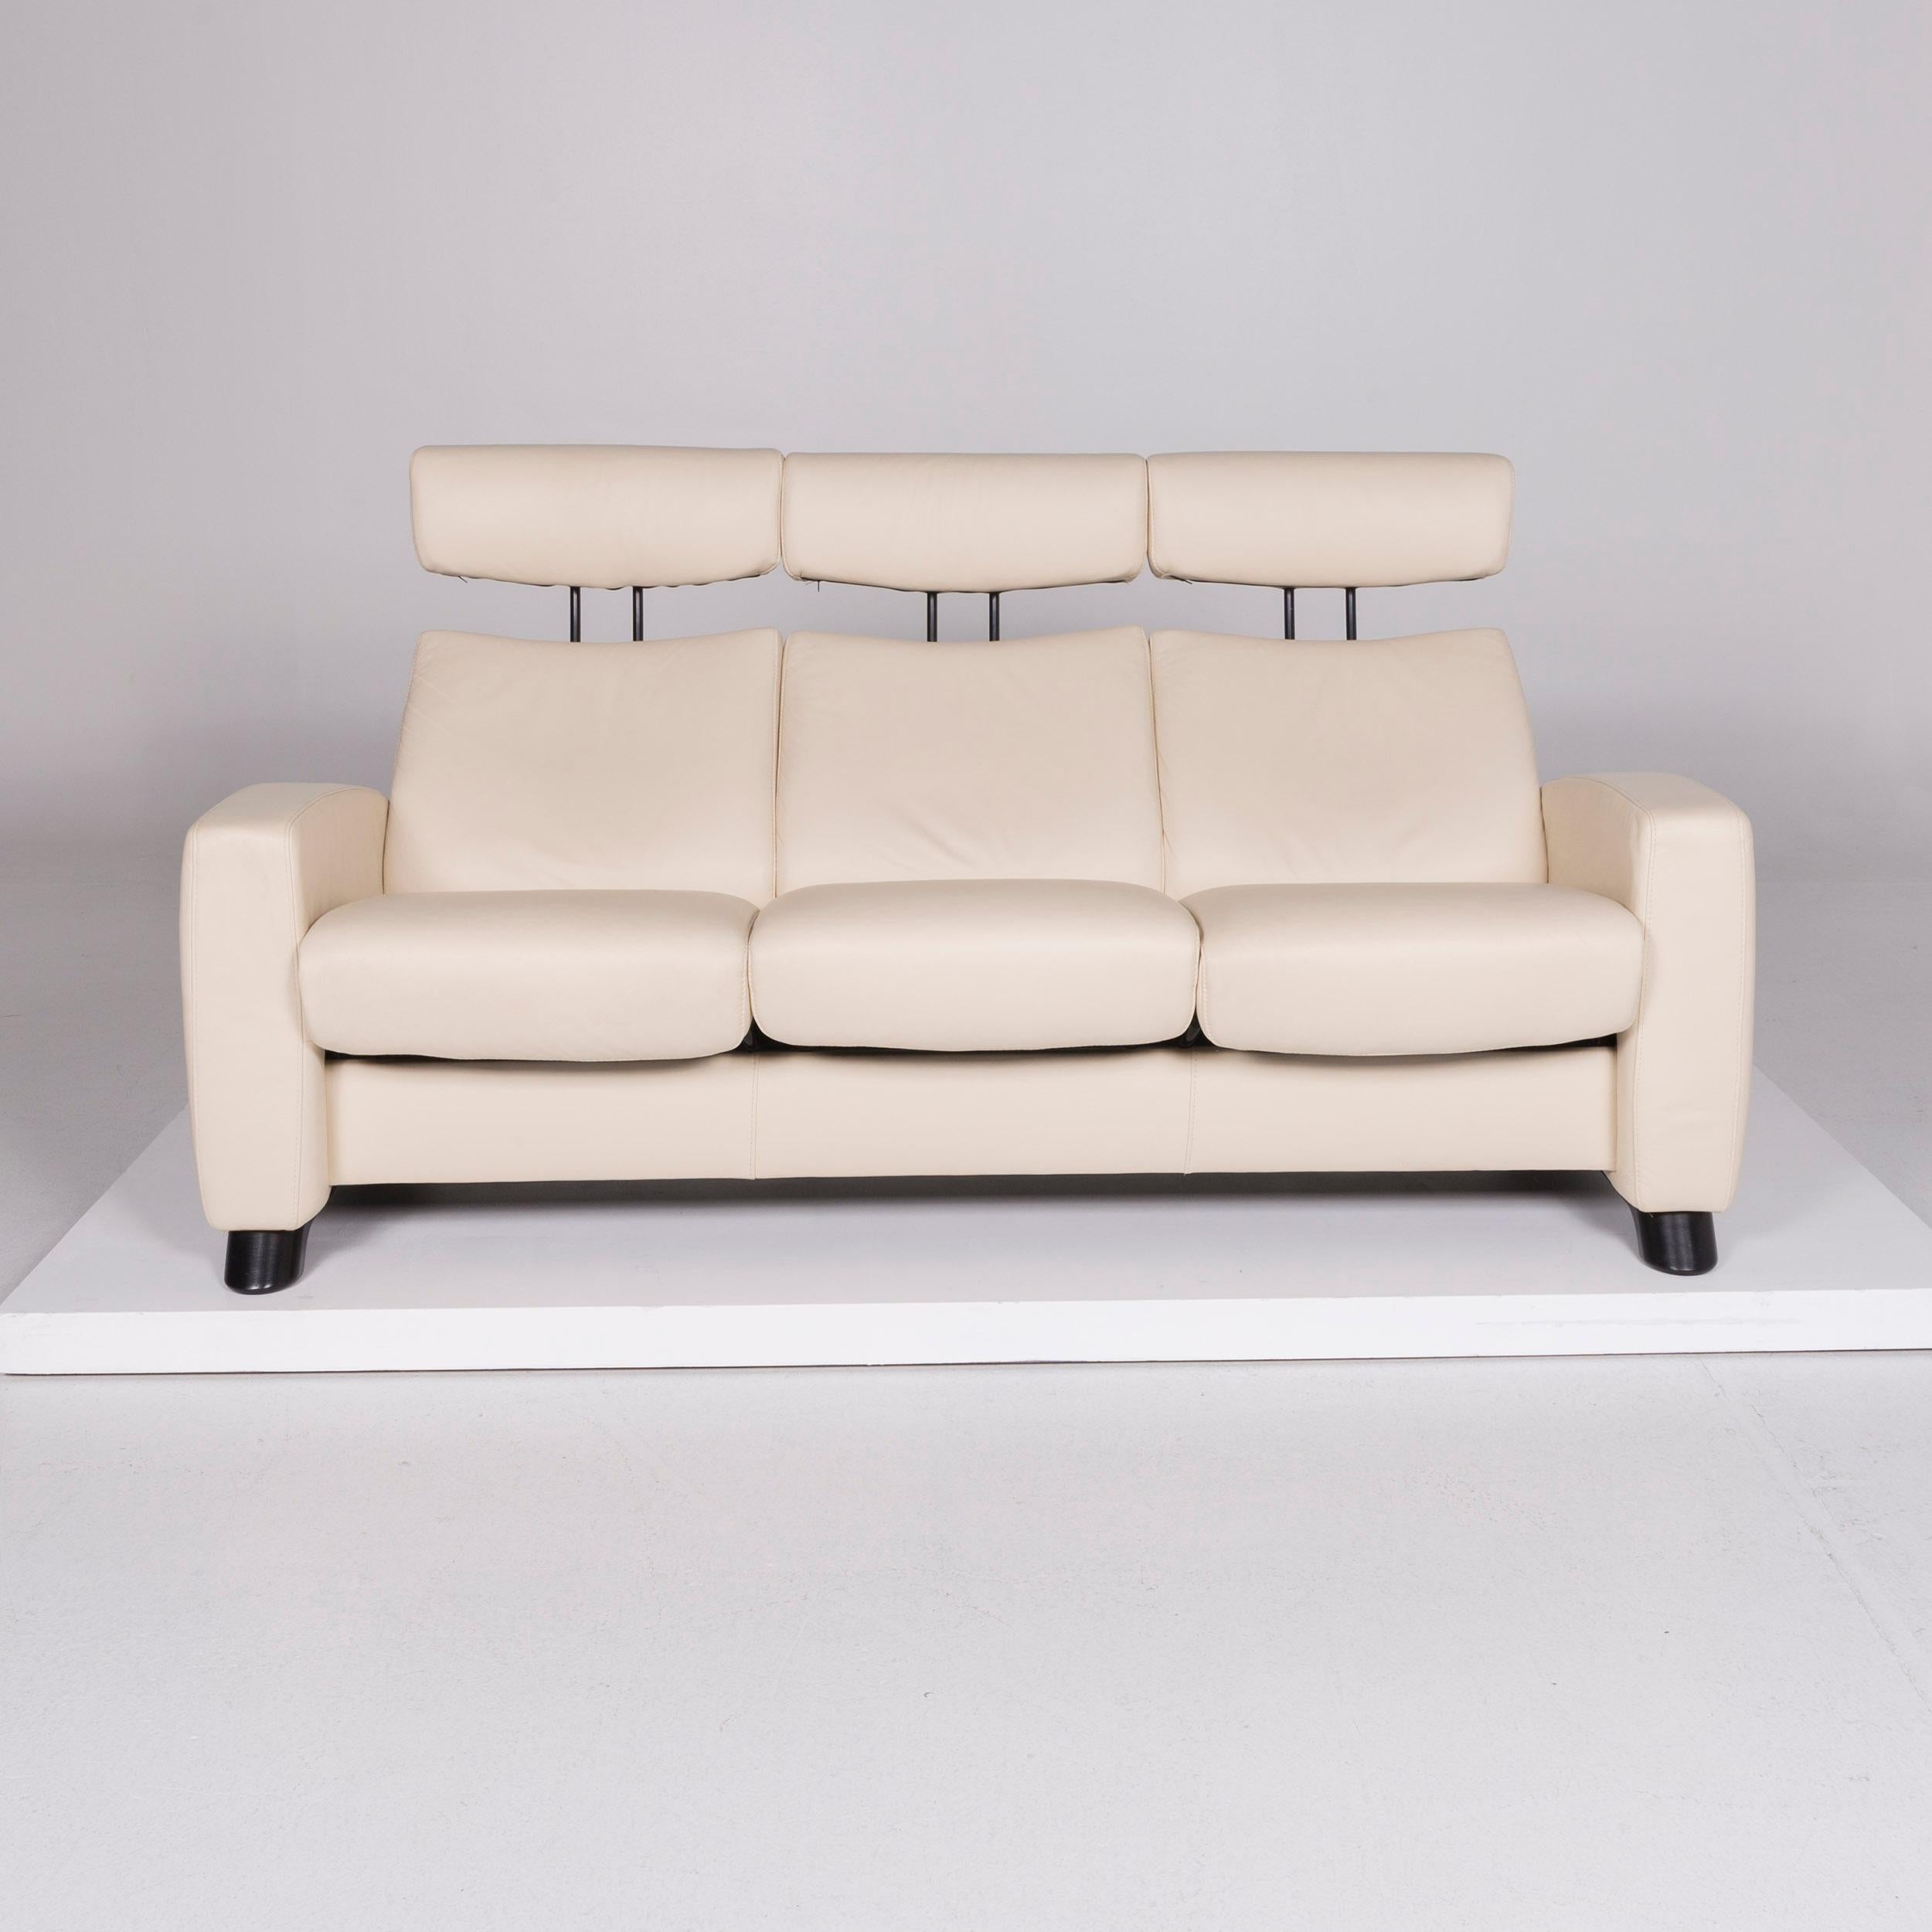 We bring to you a stressless Arion leather sofa beige three-seat.

 Product measurements in centimeters:
 
Measures: Depth 85
Width 196
Height 98
Seat-height 44
Rest-height 59
Seat-depth 49
Seat-width 165
Back-height 57.
  